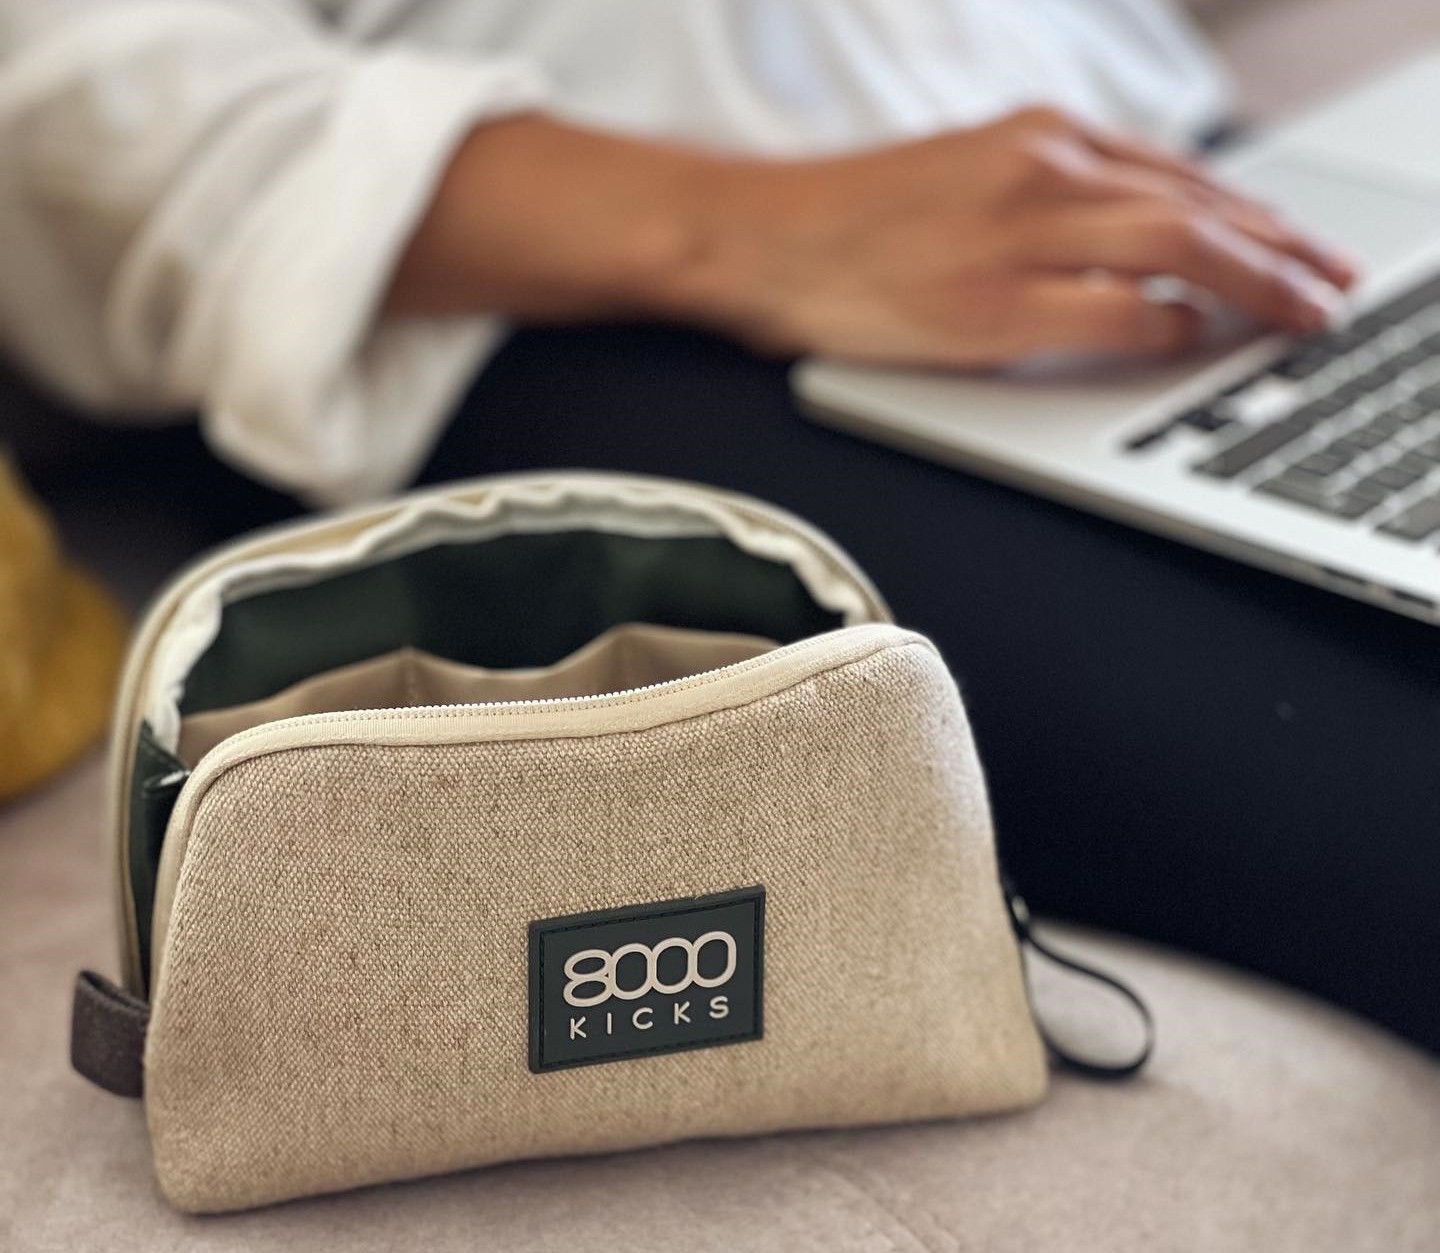 The 8000Kicks' Waterproof Hemp Bags Are A Holiday Gift List Must